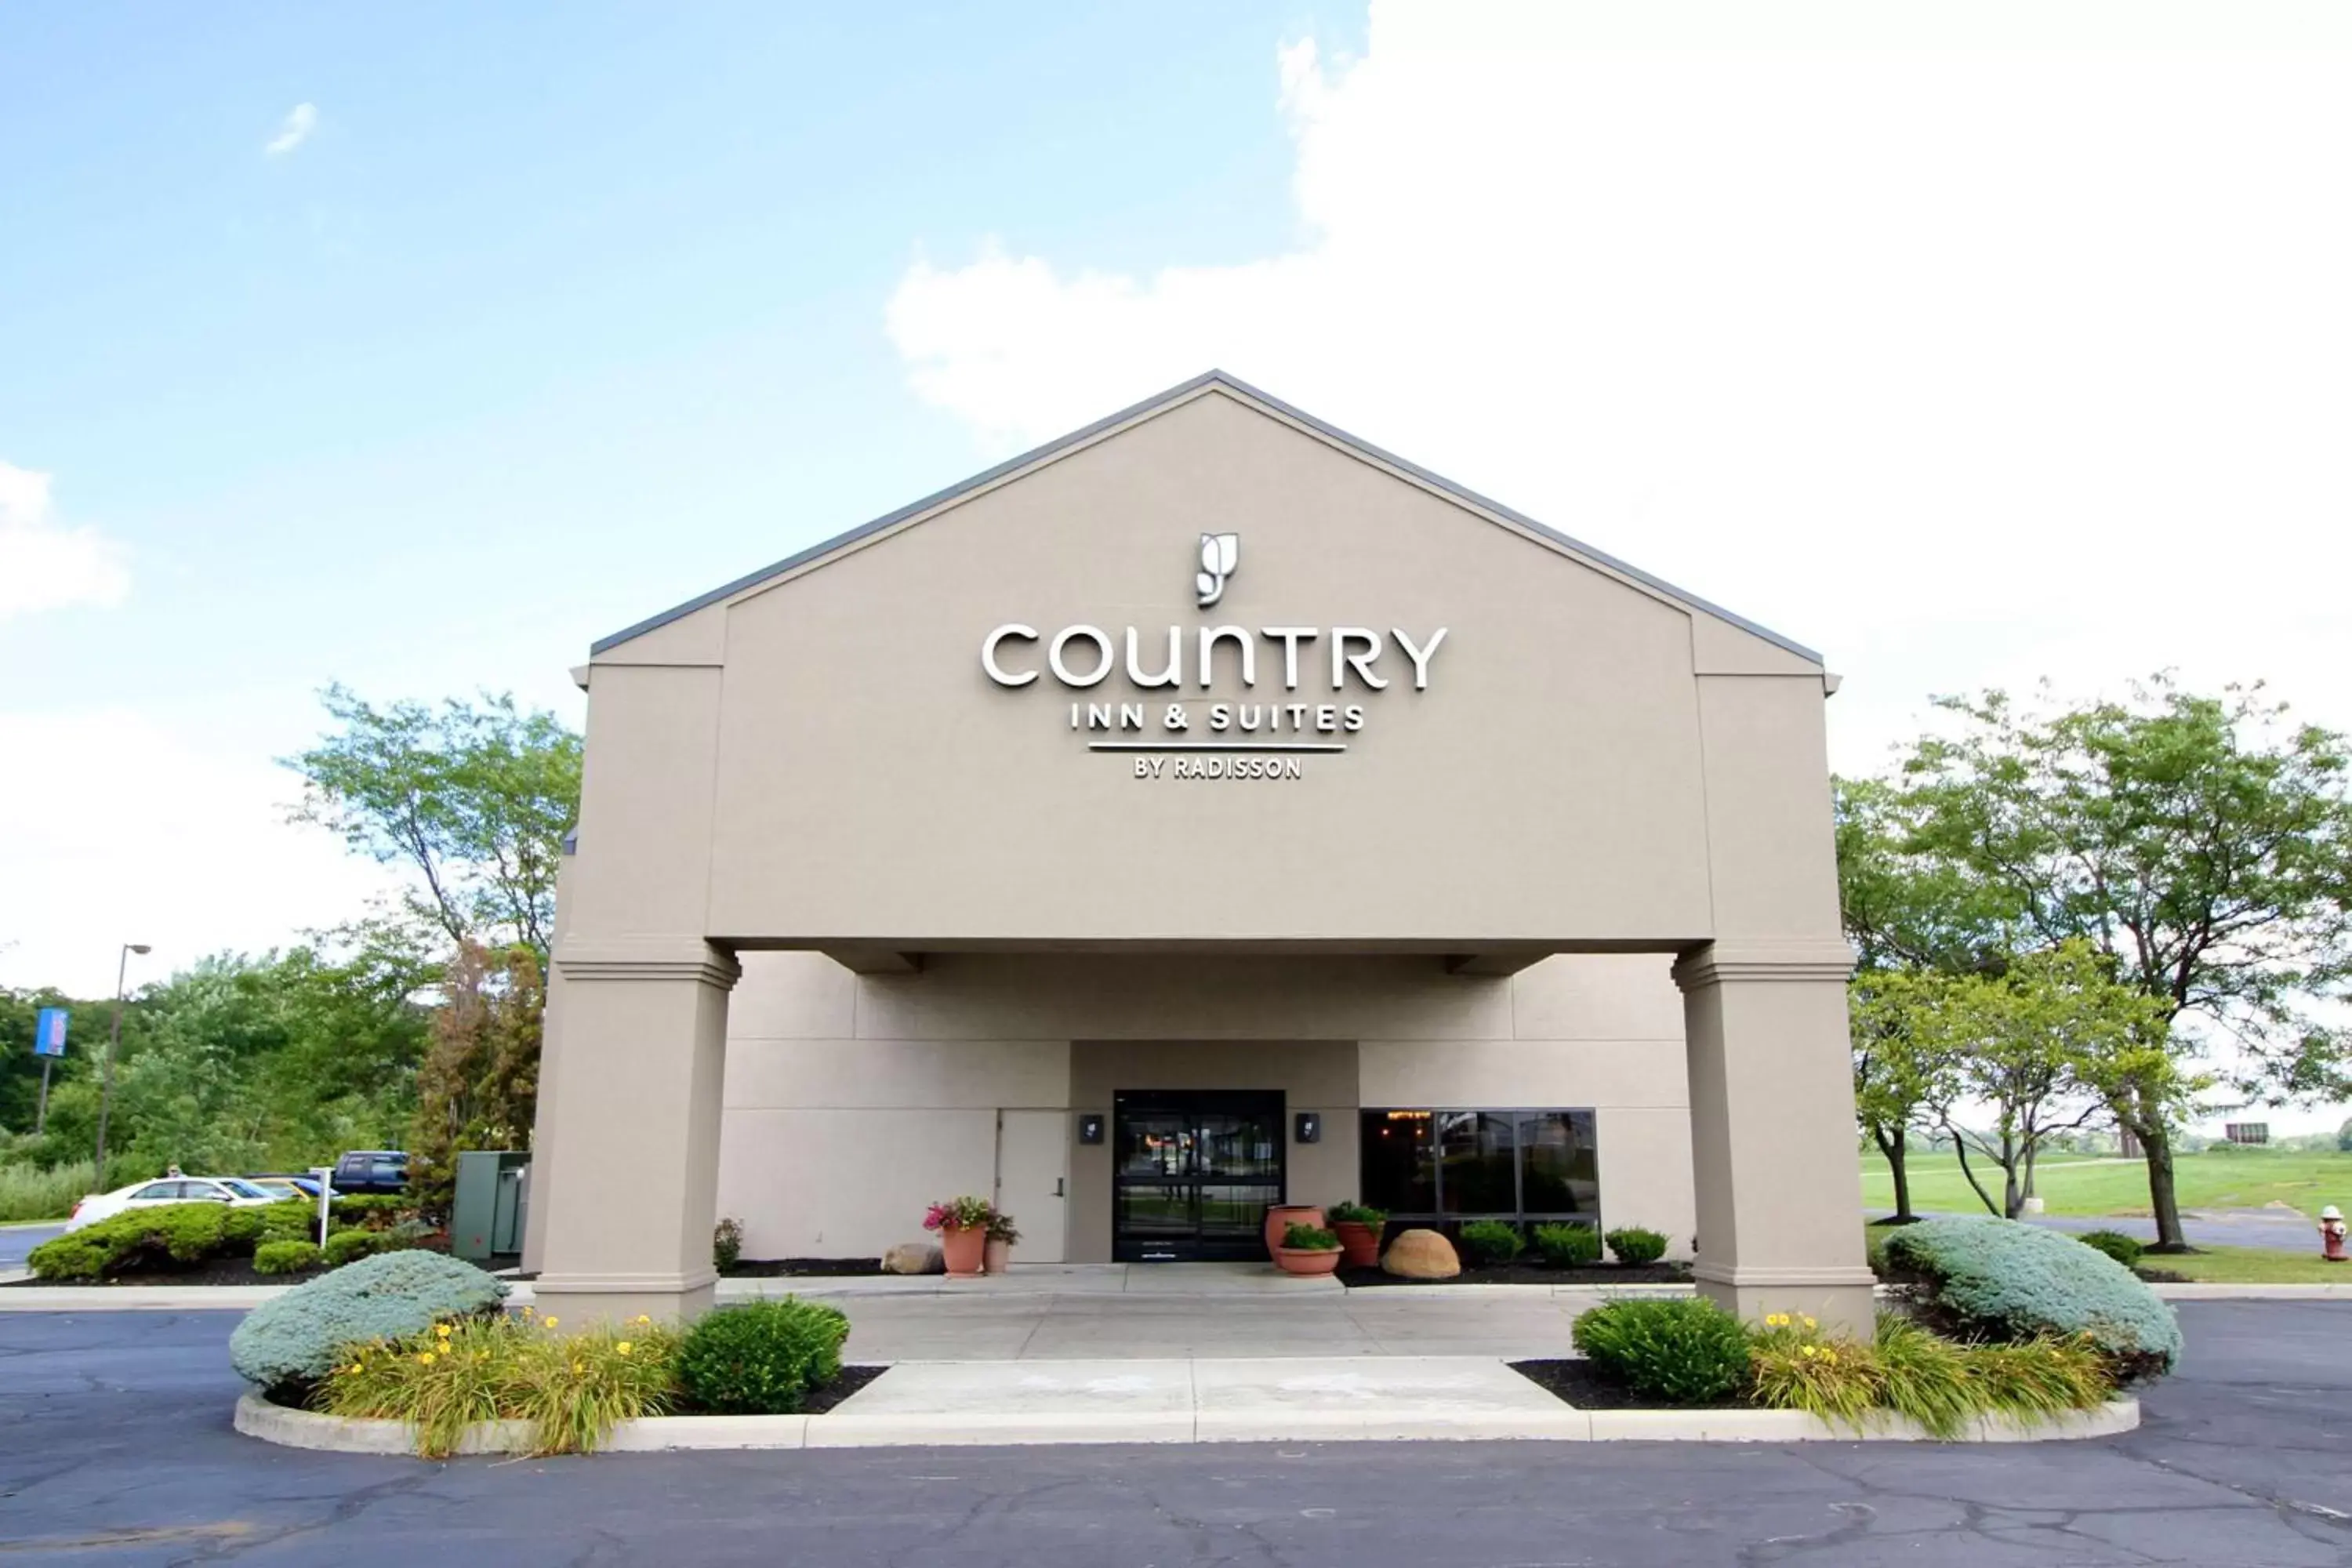 Property building in Country Inn & Suites by Radisson, Sandusky South, OH